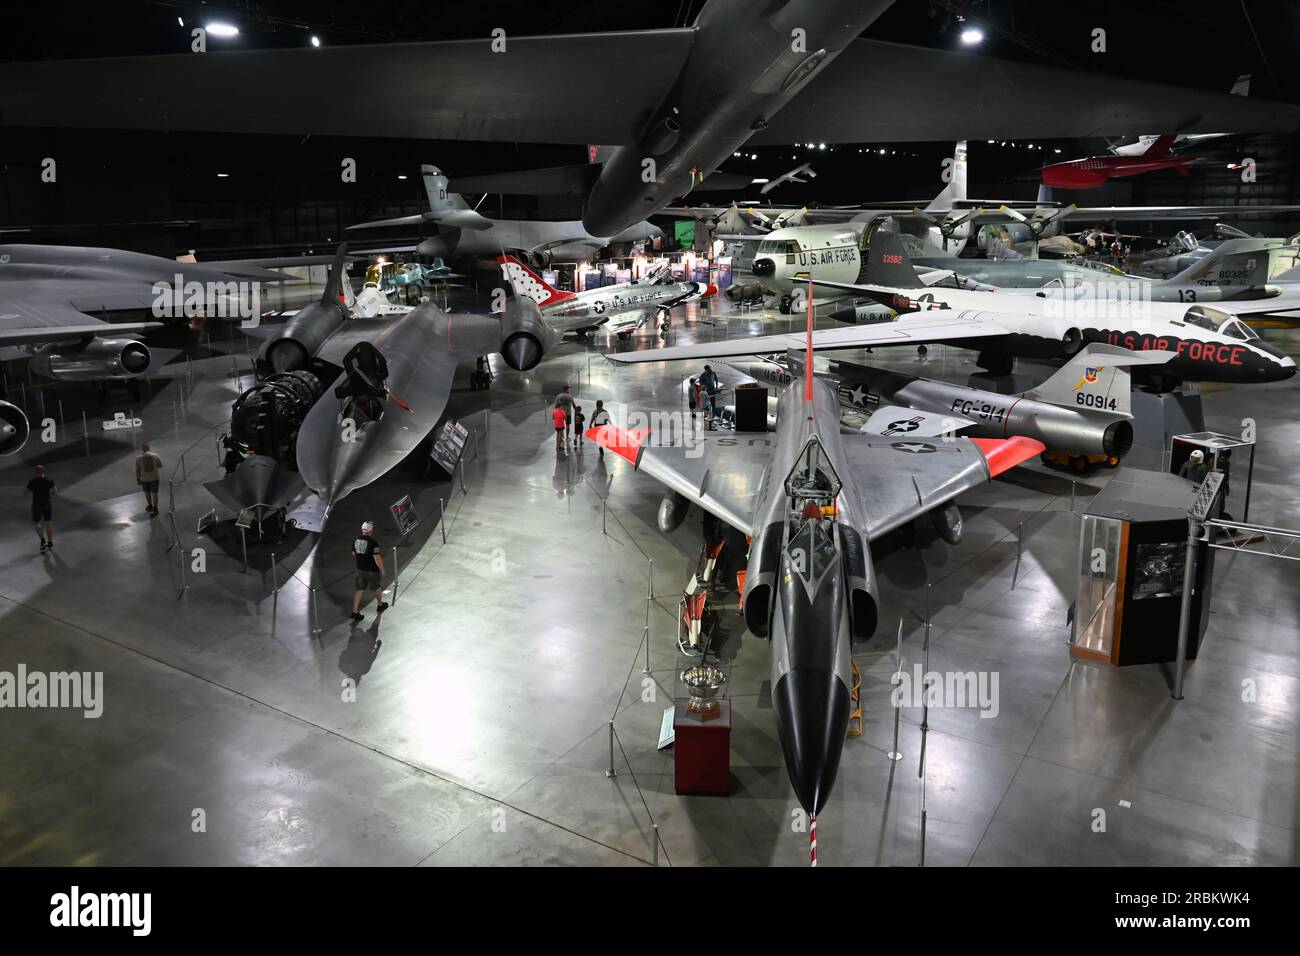 Looking down at the aircraft in the Cold War Hanger at the US Air Force National Museum in Dayton, Ohio. Stock Photo